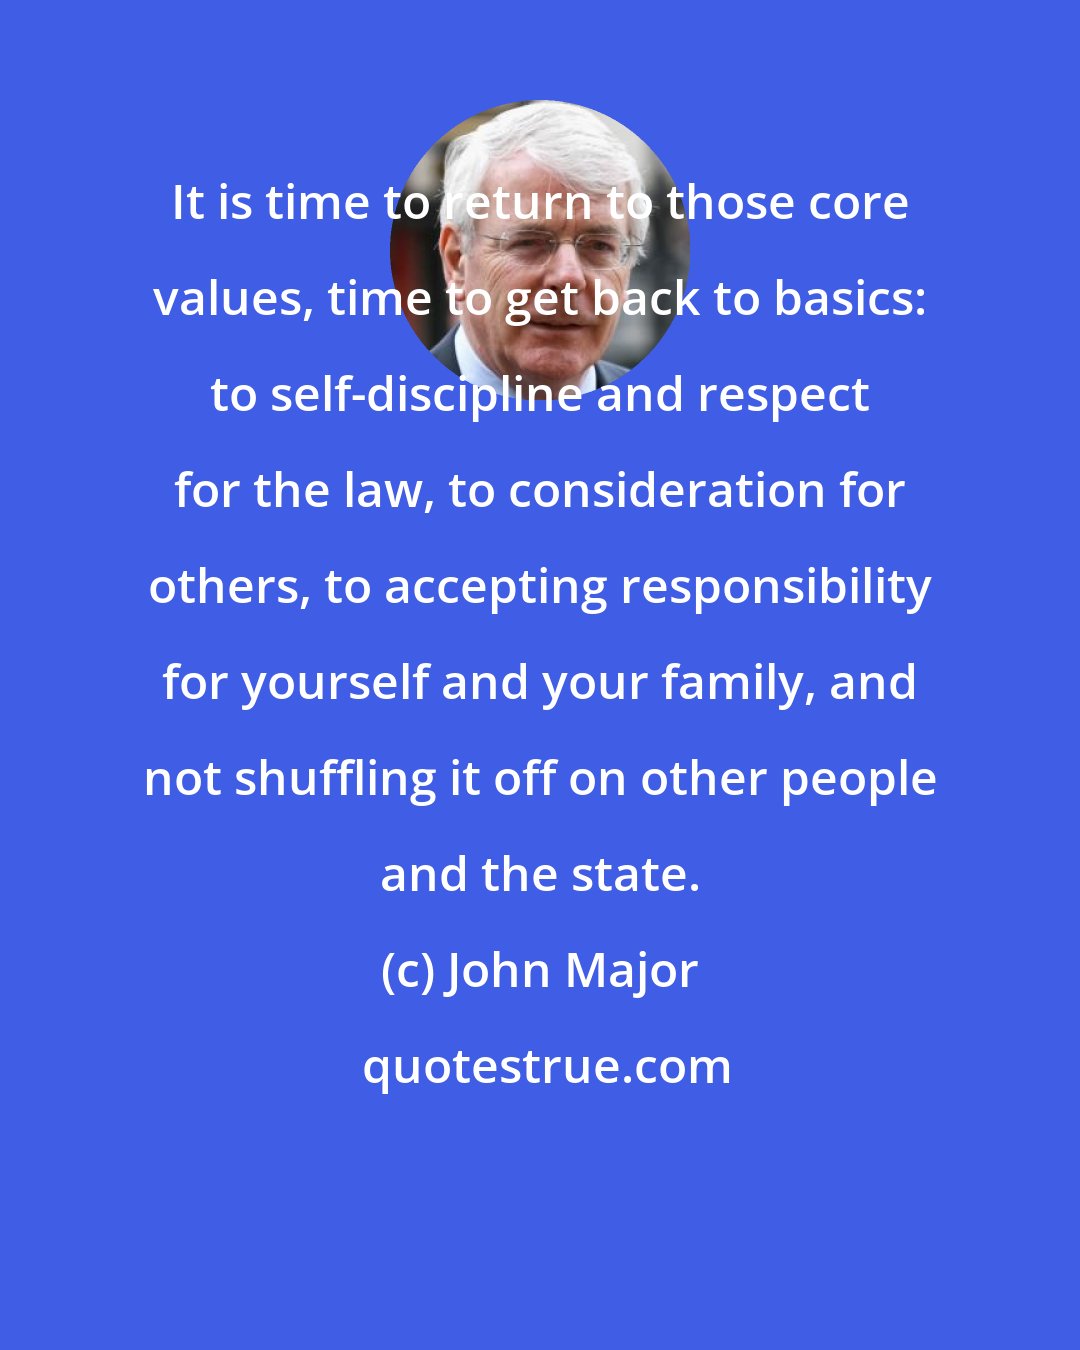 John Major: It is time to return to those core values, time to get back to basics: to self-discipline and respect for the law, to consideration for others, to accepting responsibility for yourself and your family, and not shuffling it off on other people and the state.